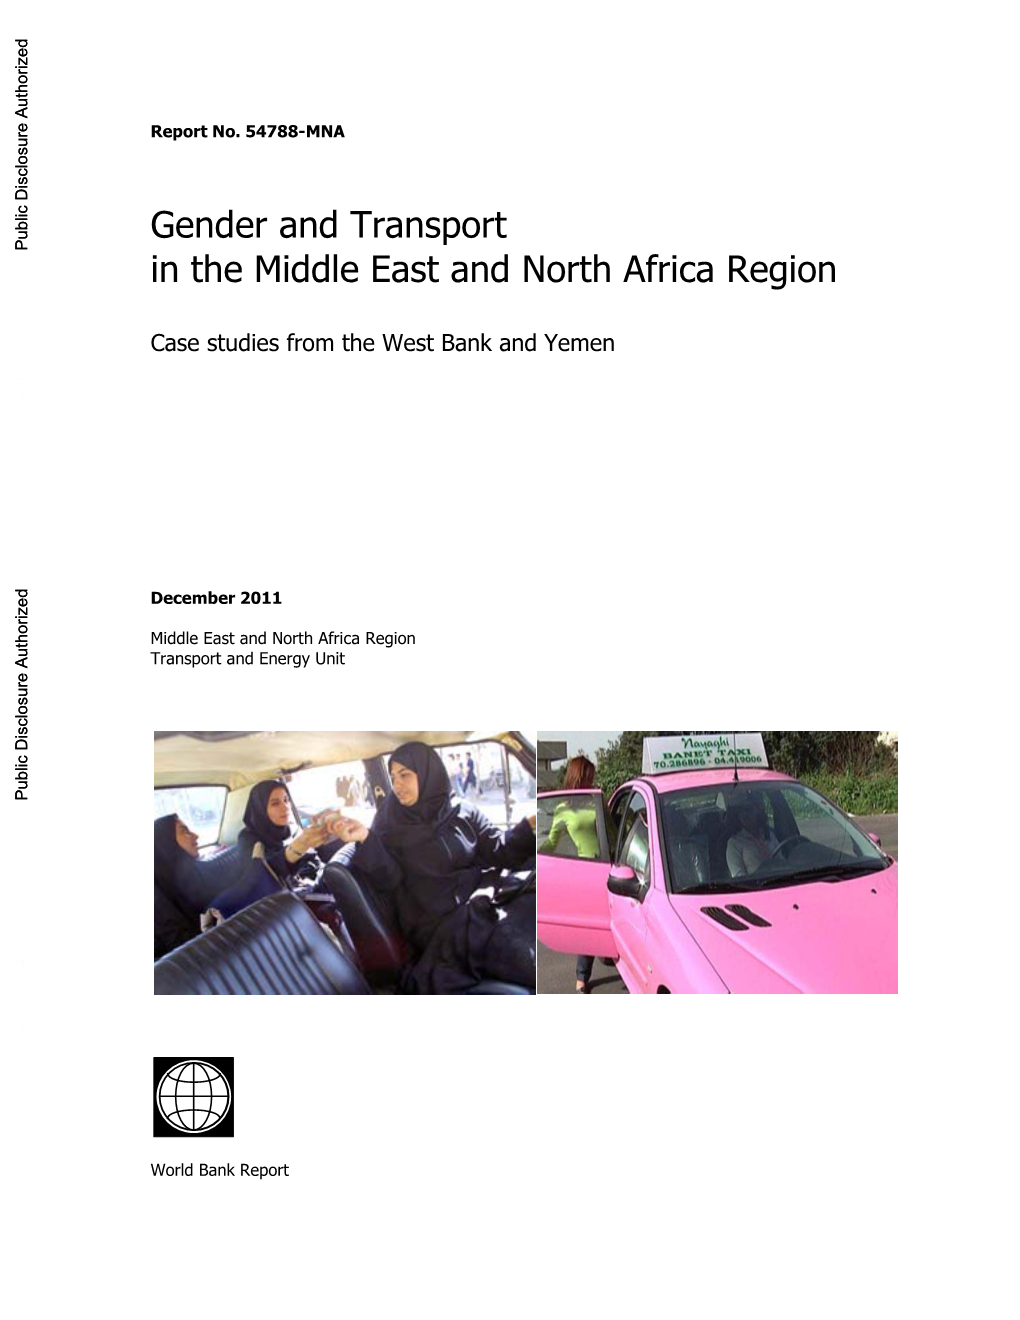 Gender and Transport in the Middle East and North Africa Region Case Studies from the West Bank and Yemen